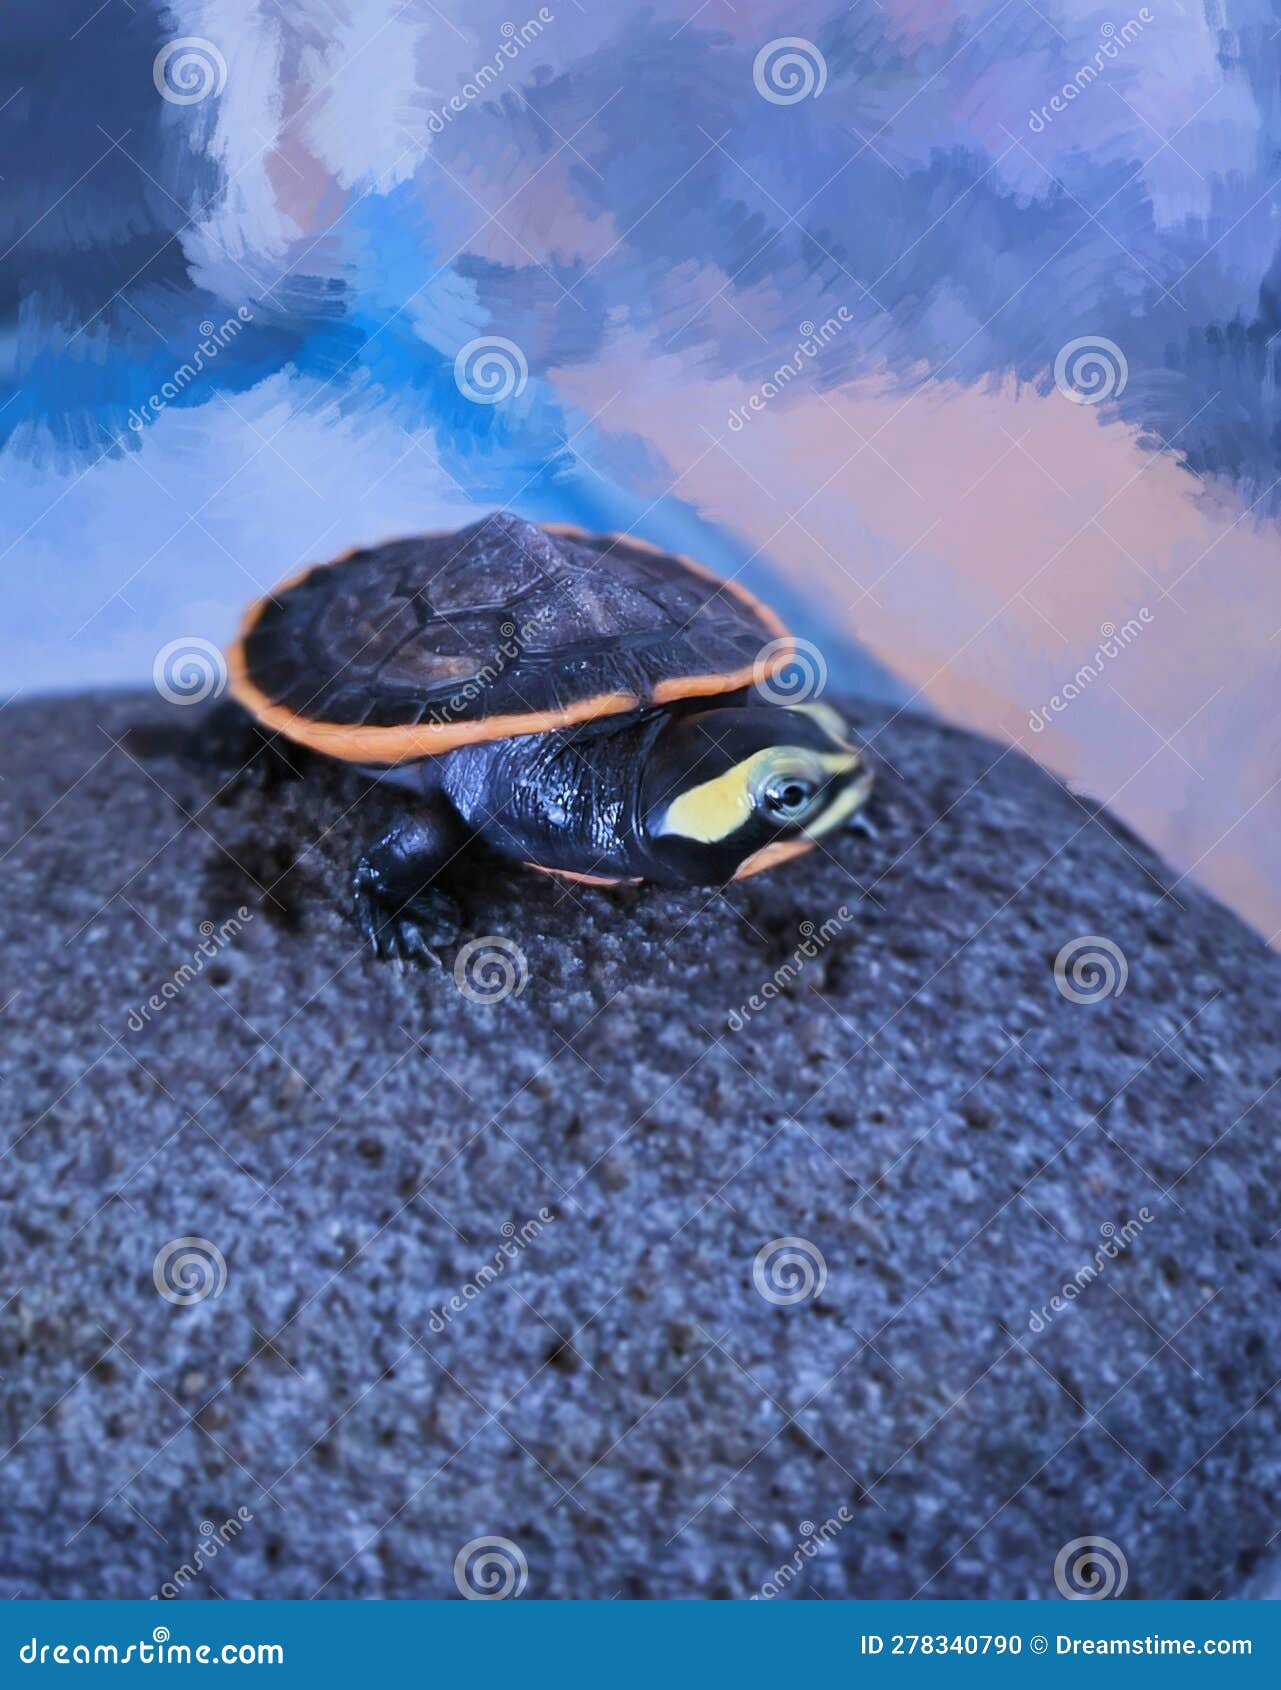 Baby Red Bellied Short-necked Turtle Stock Photo - Image of necked ...